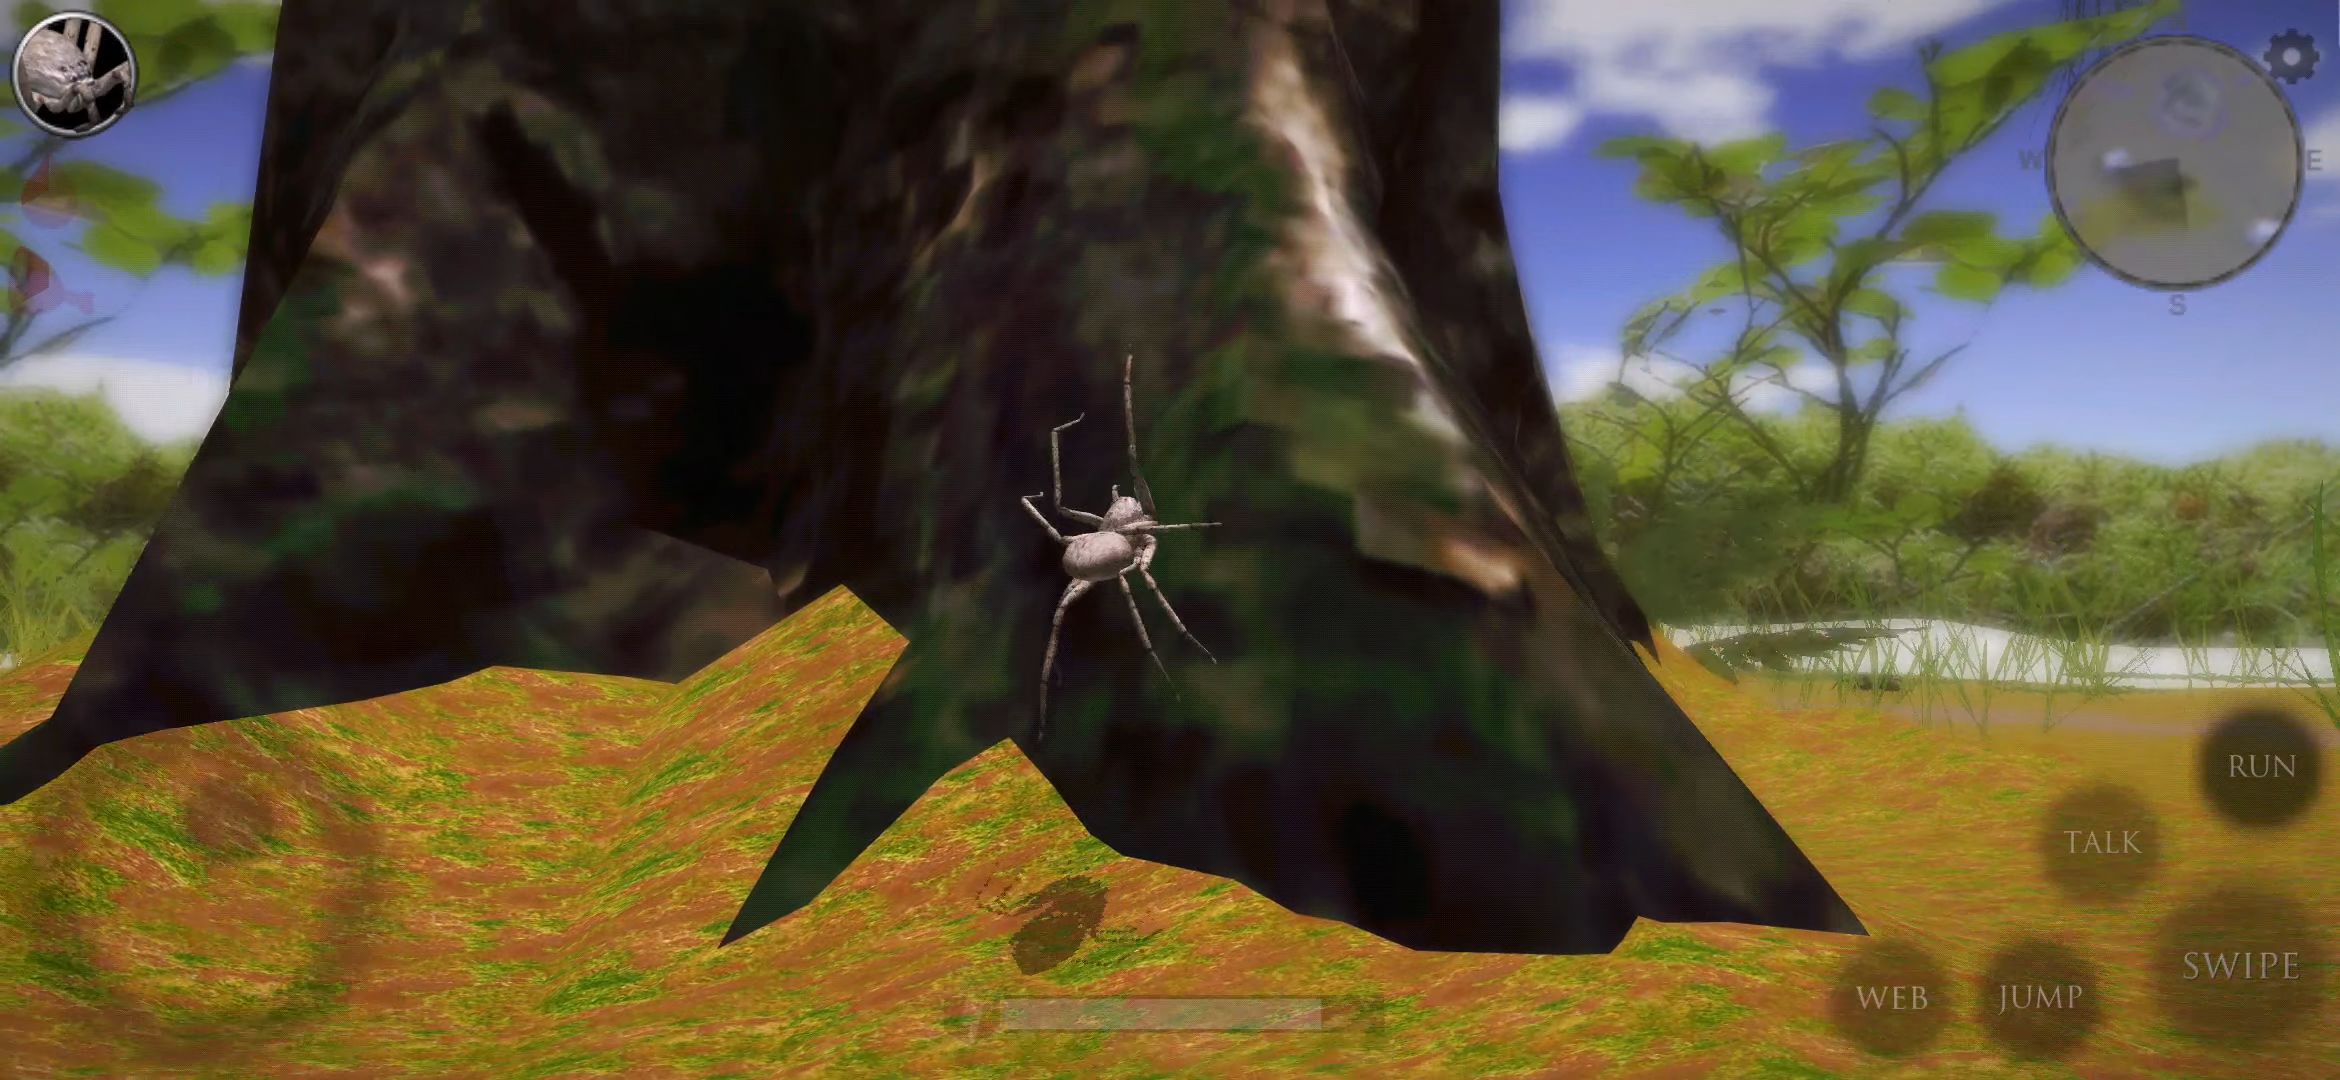 Ultimate Spider Simulator 2 for Android